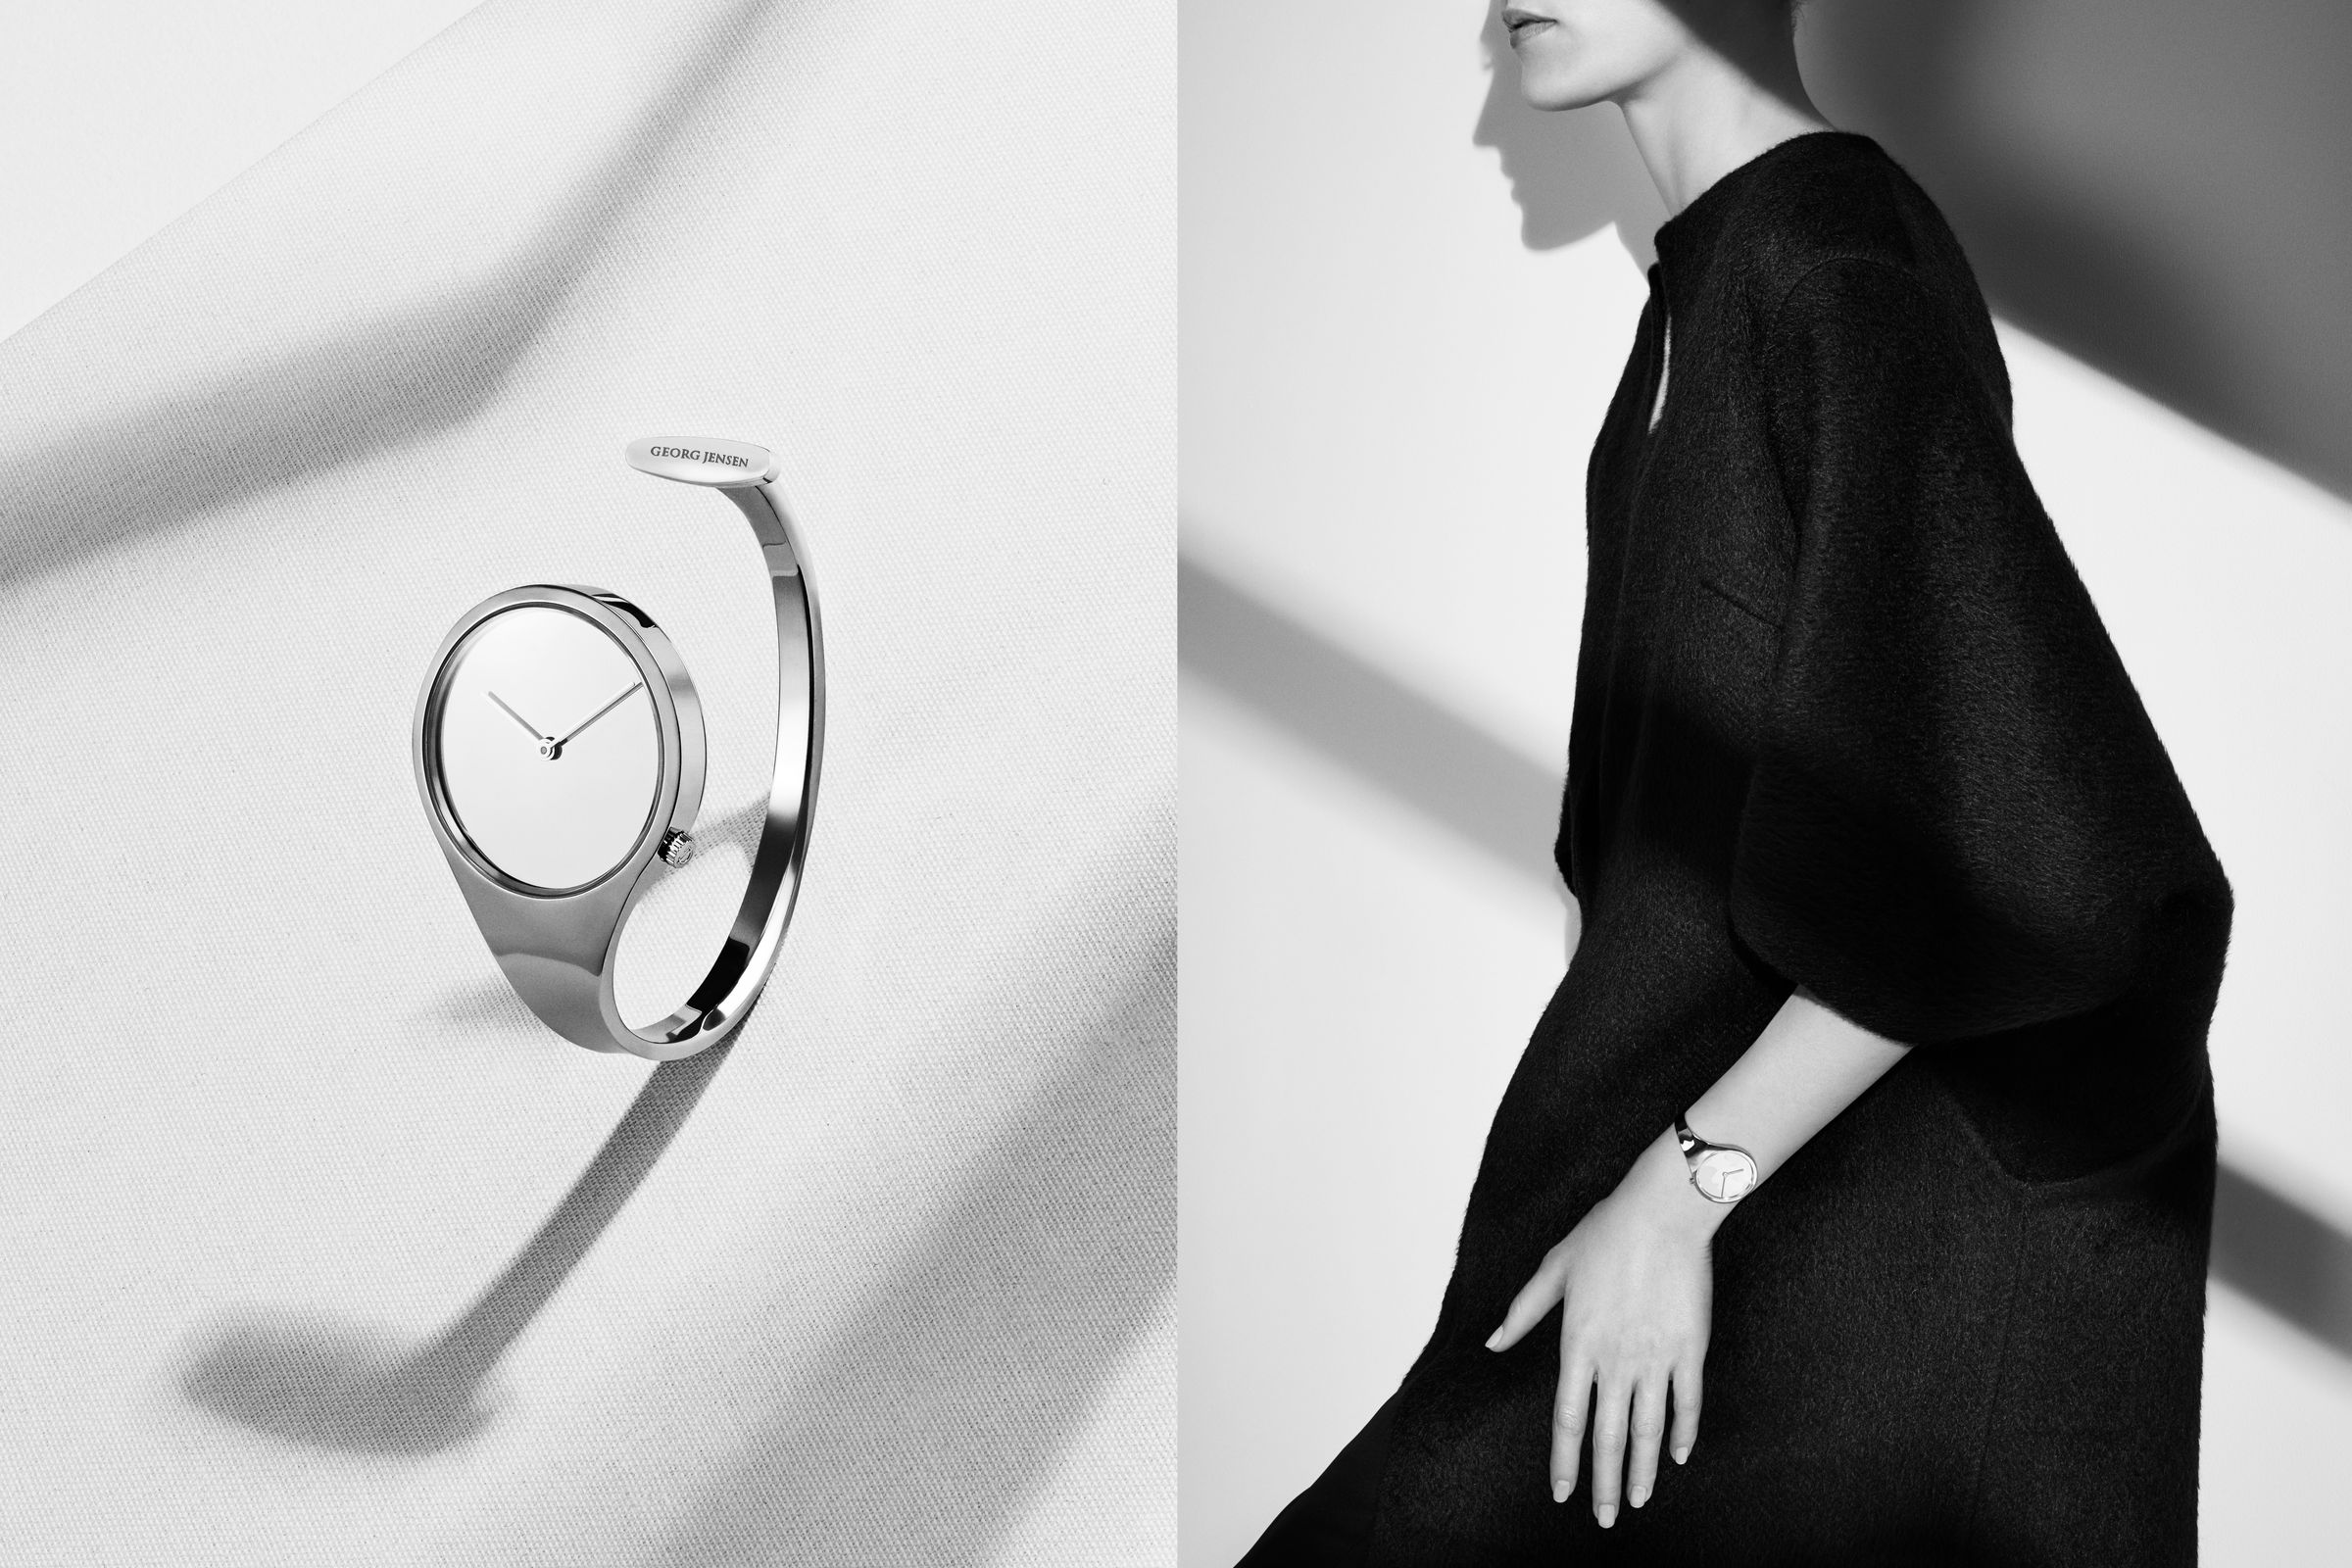 Georg Jensen watches campaign photographed by Hasse Nielsen and Toby McFarlan Pond